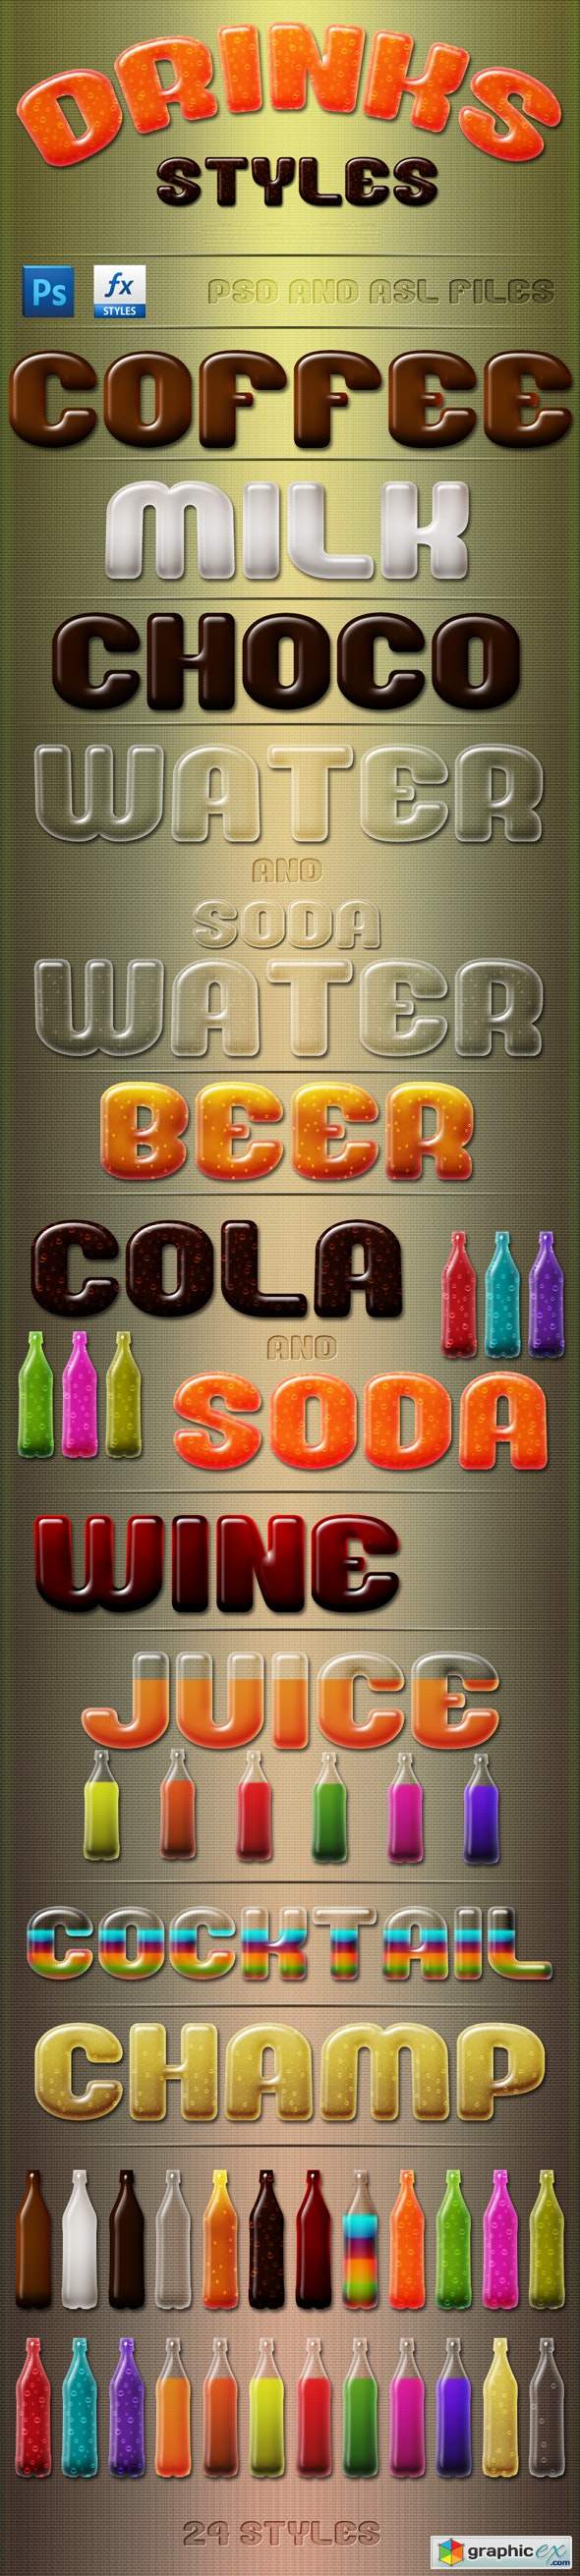 Drinks Styles Text Effects